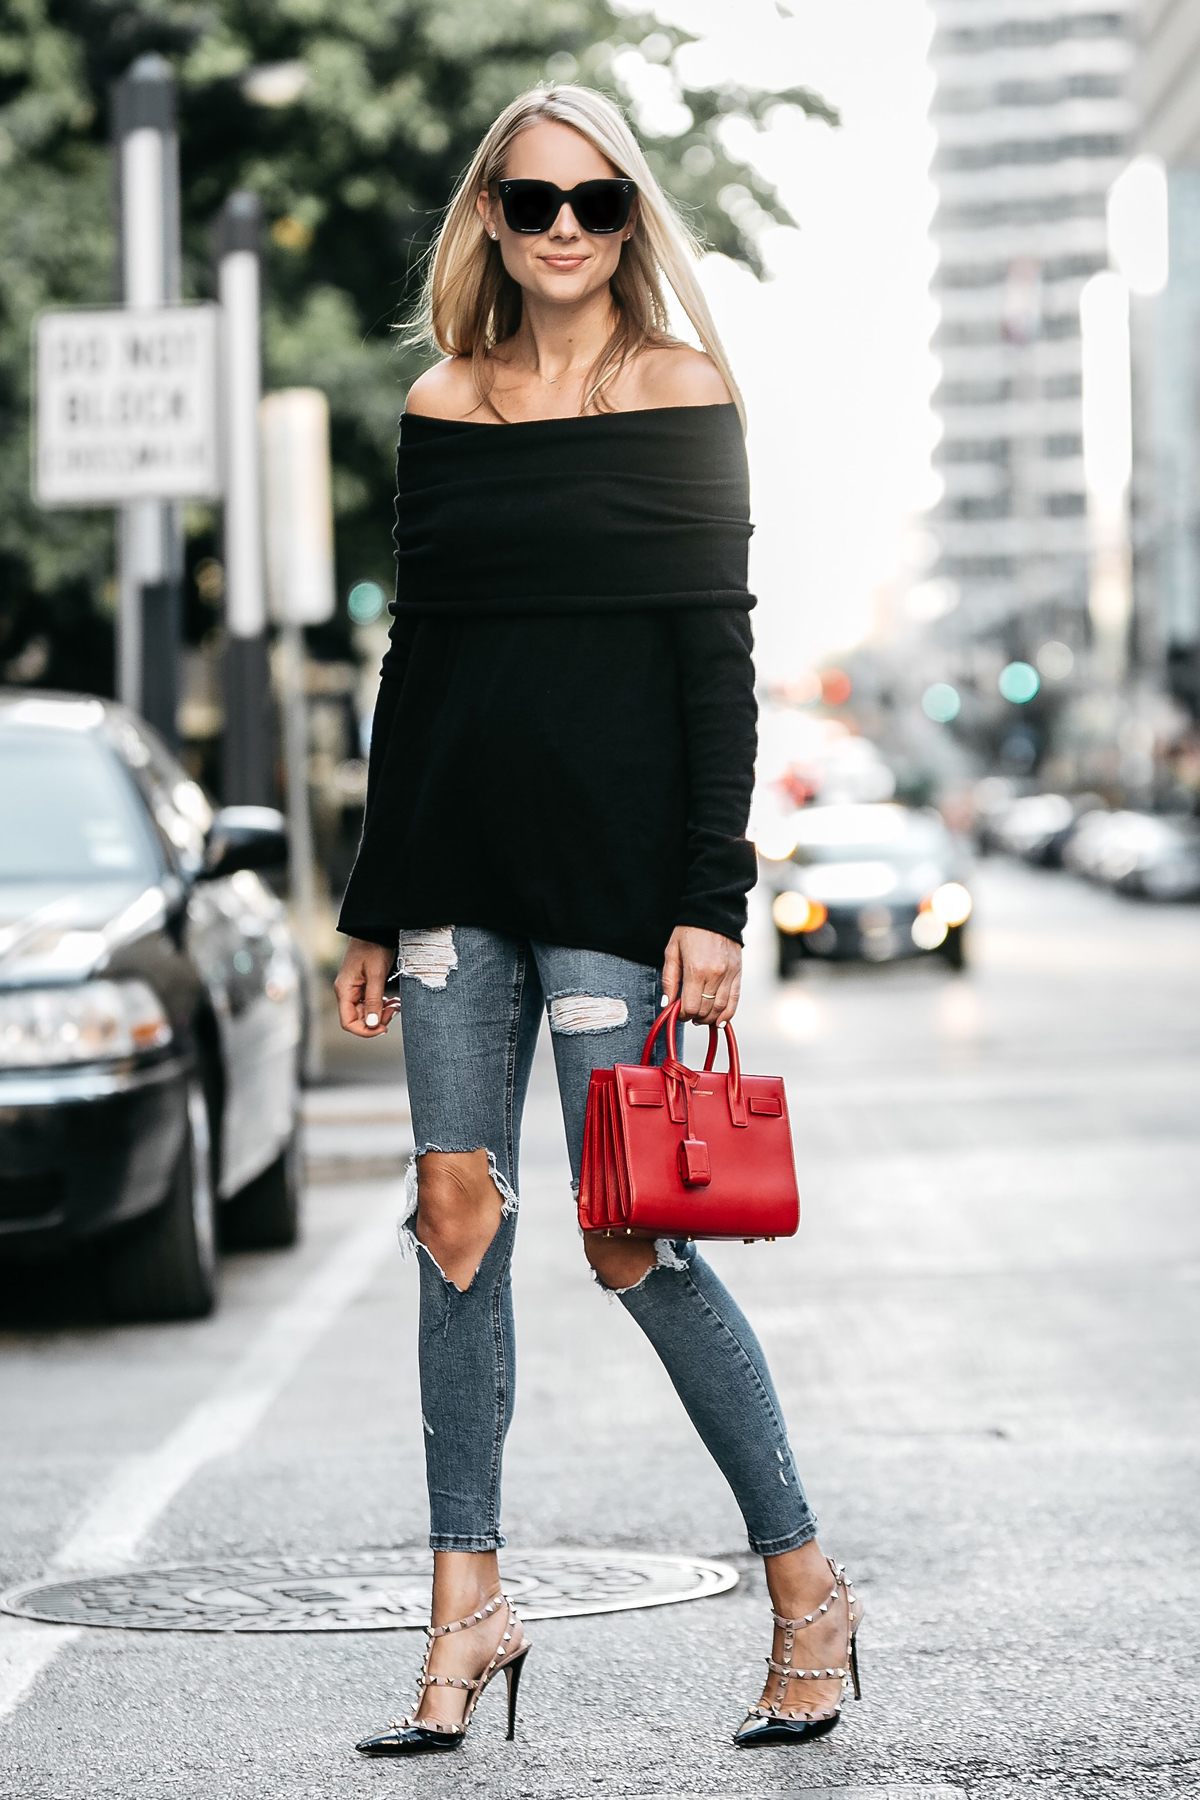 A CHIC BLACK OFF-THE-SHOULDER SWEATER | Fashion Jackson